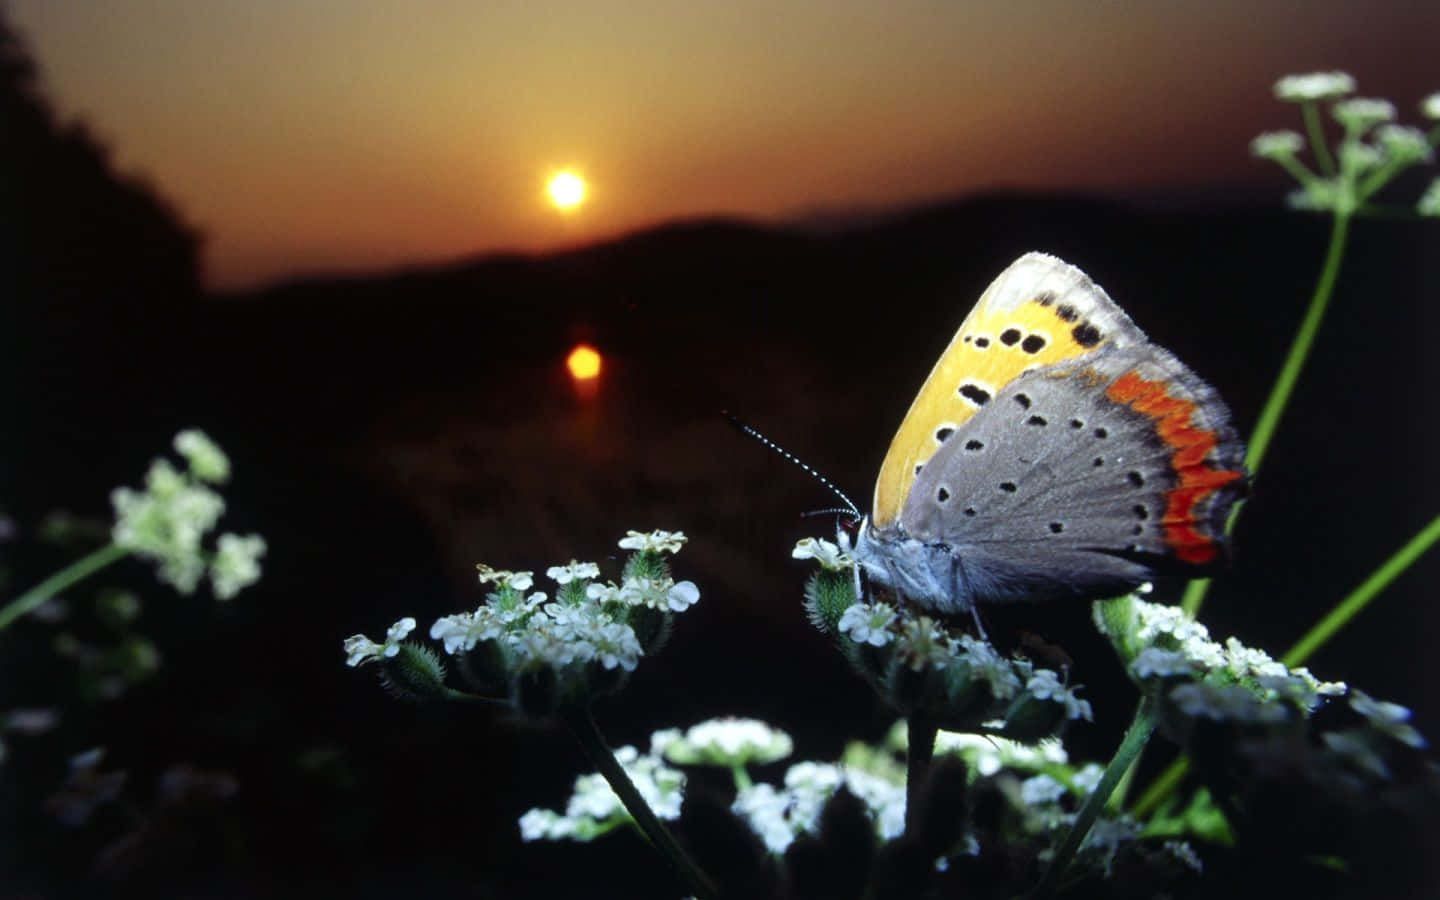 The beauty of nature seen in a real butterfly